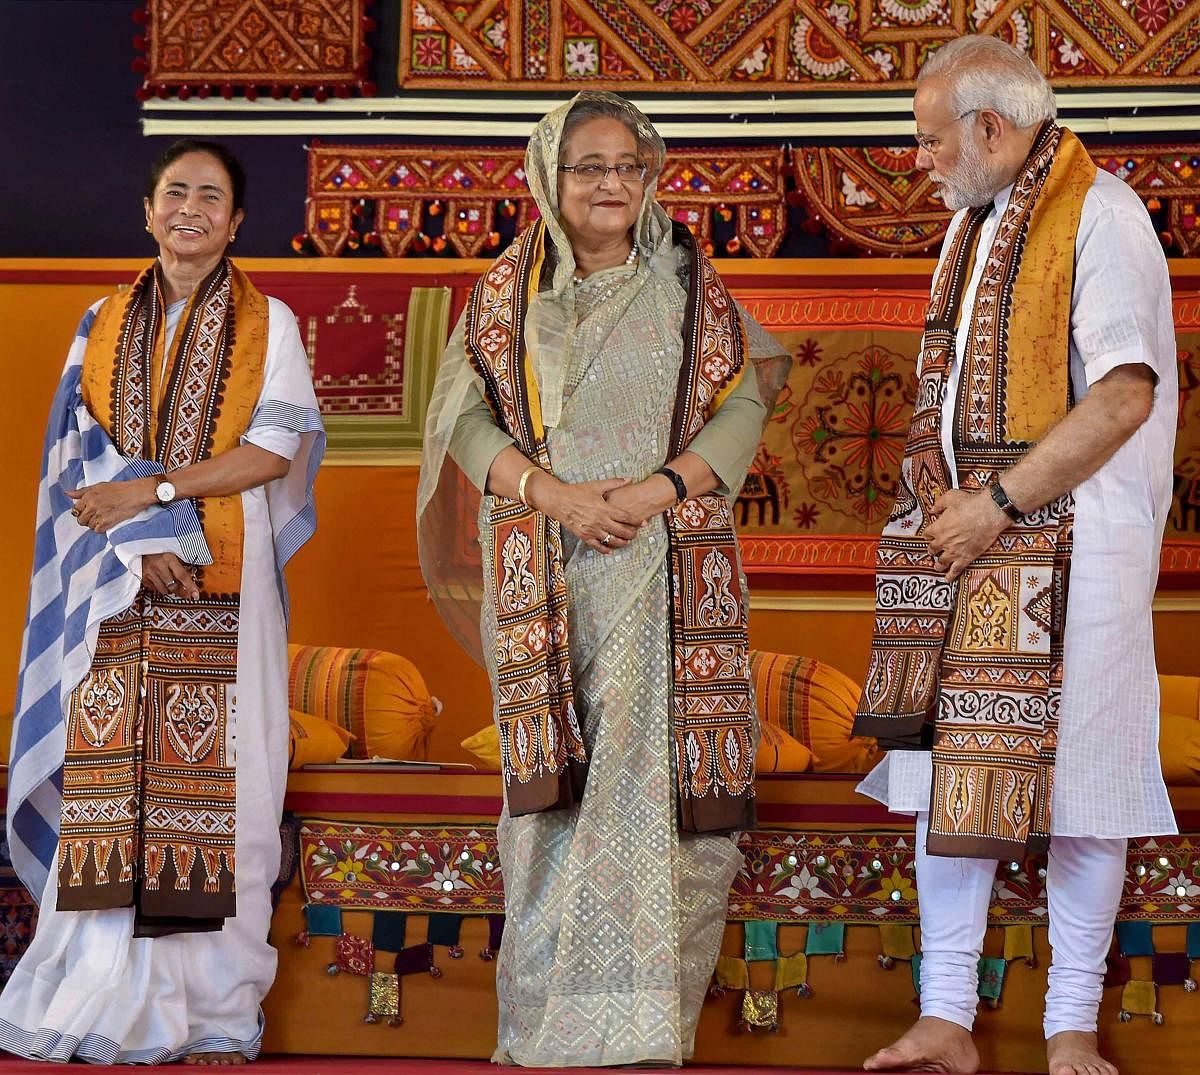 Prime Minister Narendra Modi speaks with his Bangladeshi counterpart Sheikh Hasina as West Bengal Chief Minister Mamata Banerjee looks on, during the annual convocation of Visva Bharati University, in Birbhum, on Friday. PTI Photo